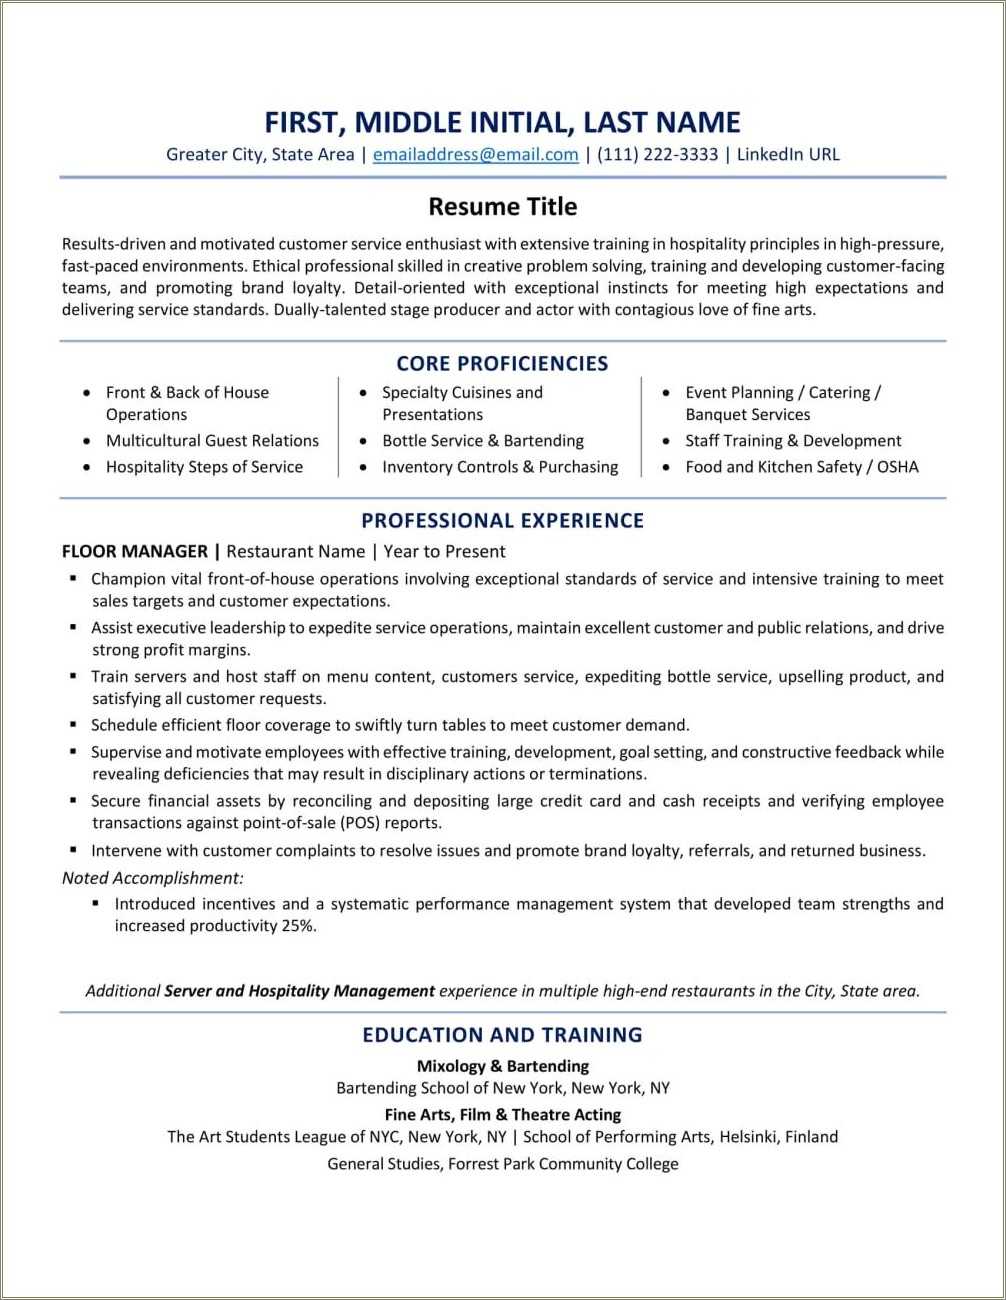 Linked In Resume For A New Job Seeker